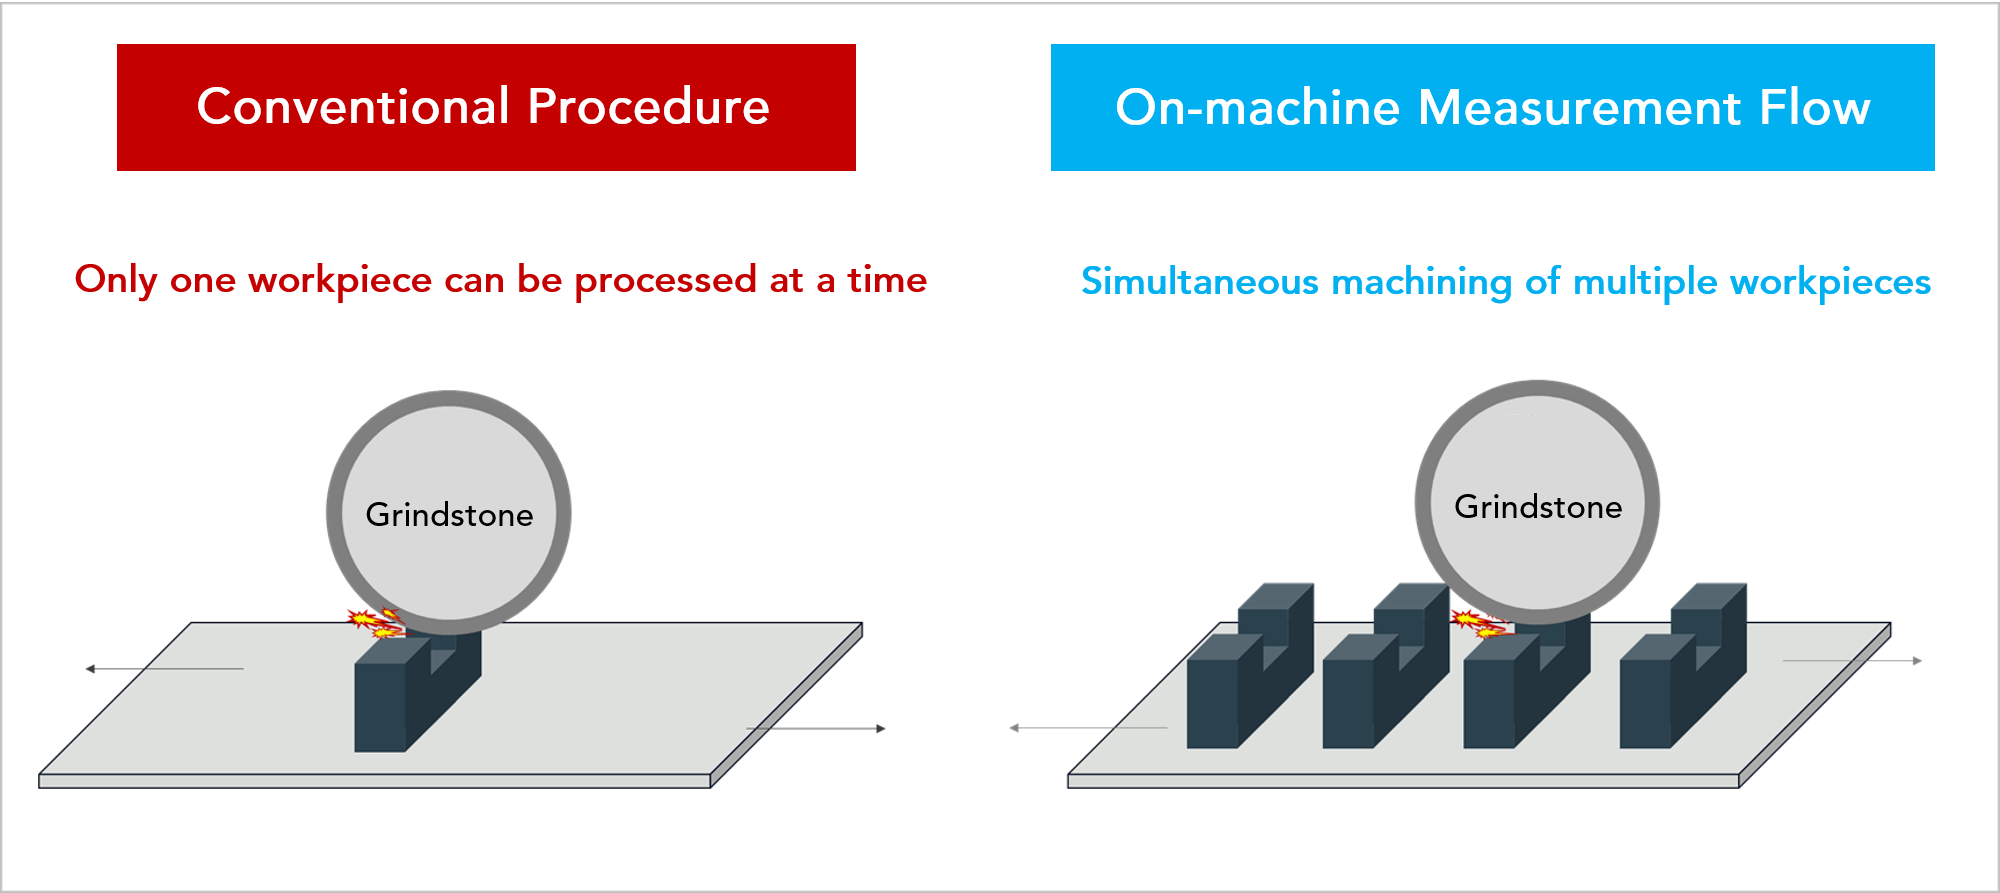 Simultaneous machining of multiple workpieces of On-machine measurement